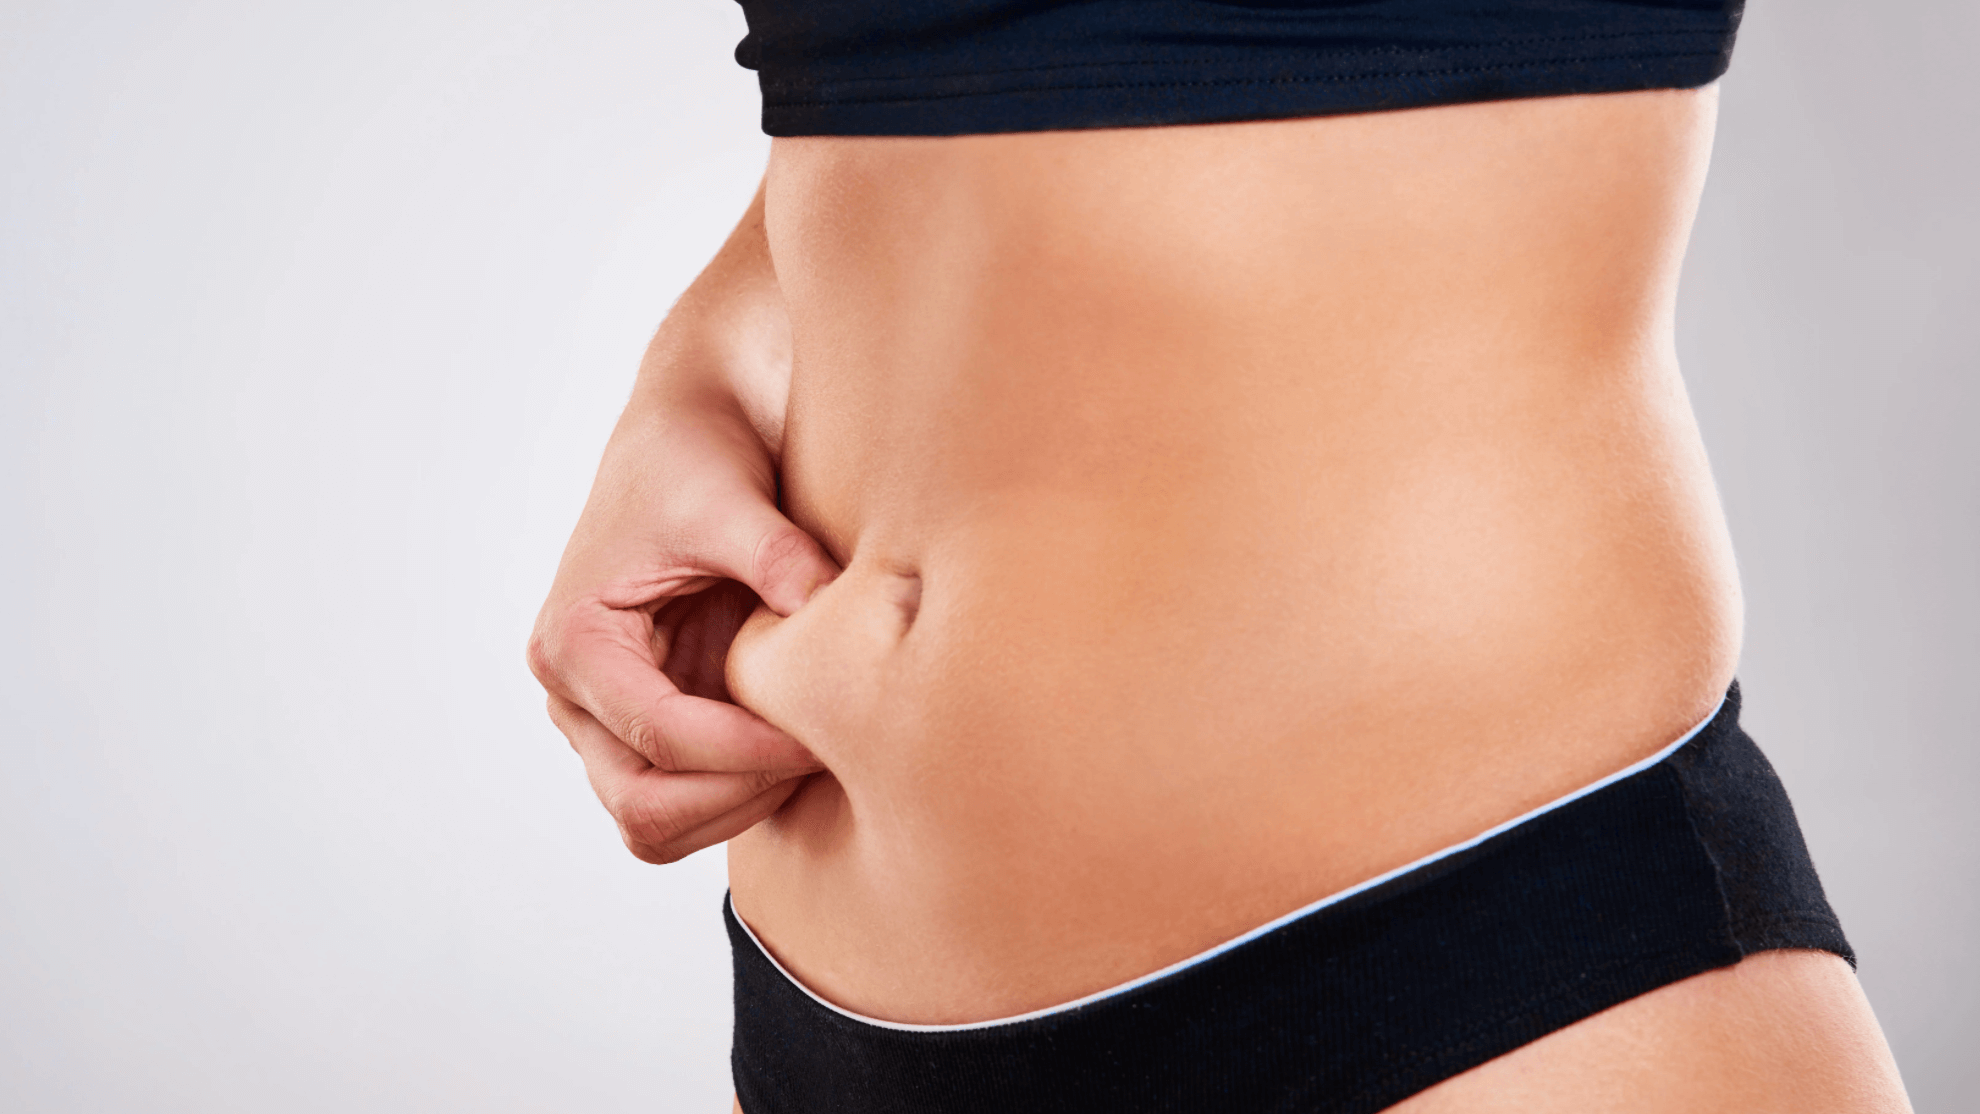 How To Lose Lower Belly Pooch - Do I Need To Have A Tummy Tuck To